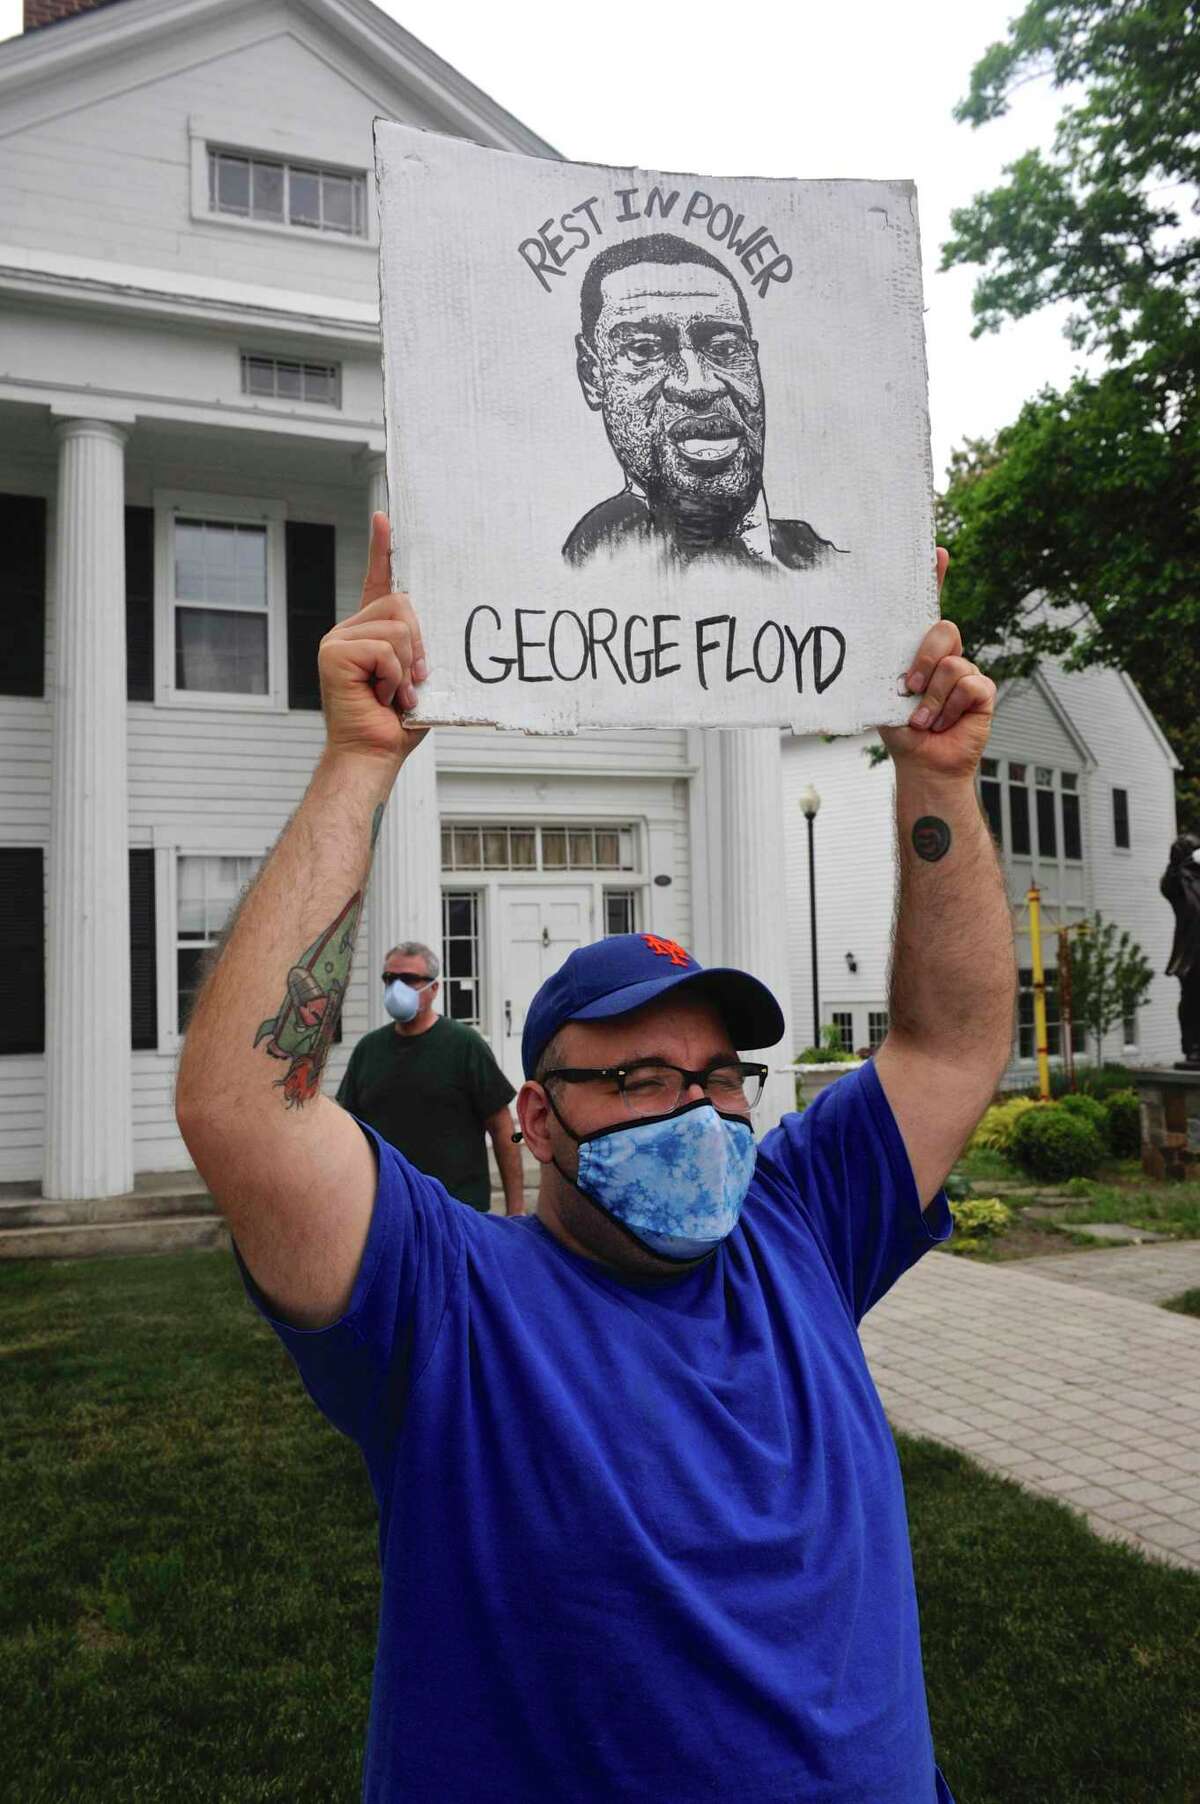 Stephen Colon, of Danbury, holds up a sign he drew for a protest in Bethel on Thursday evening. Due to coronavirus concerns a candlelight vigil, for justice in the wake of the death of George Floyd, in front of the municipal center was postponed. People gathered anyway in front of the Bethel Library. Thursday evening, June 4, 2020, in Bethel, Conn.